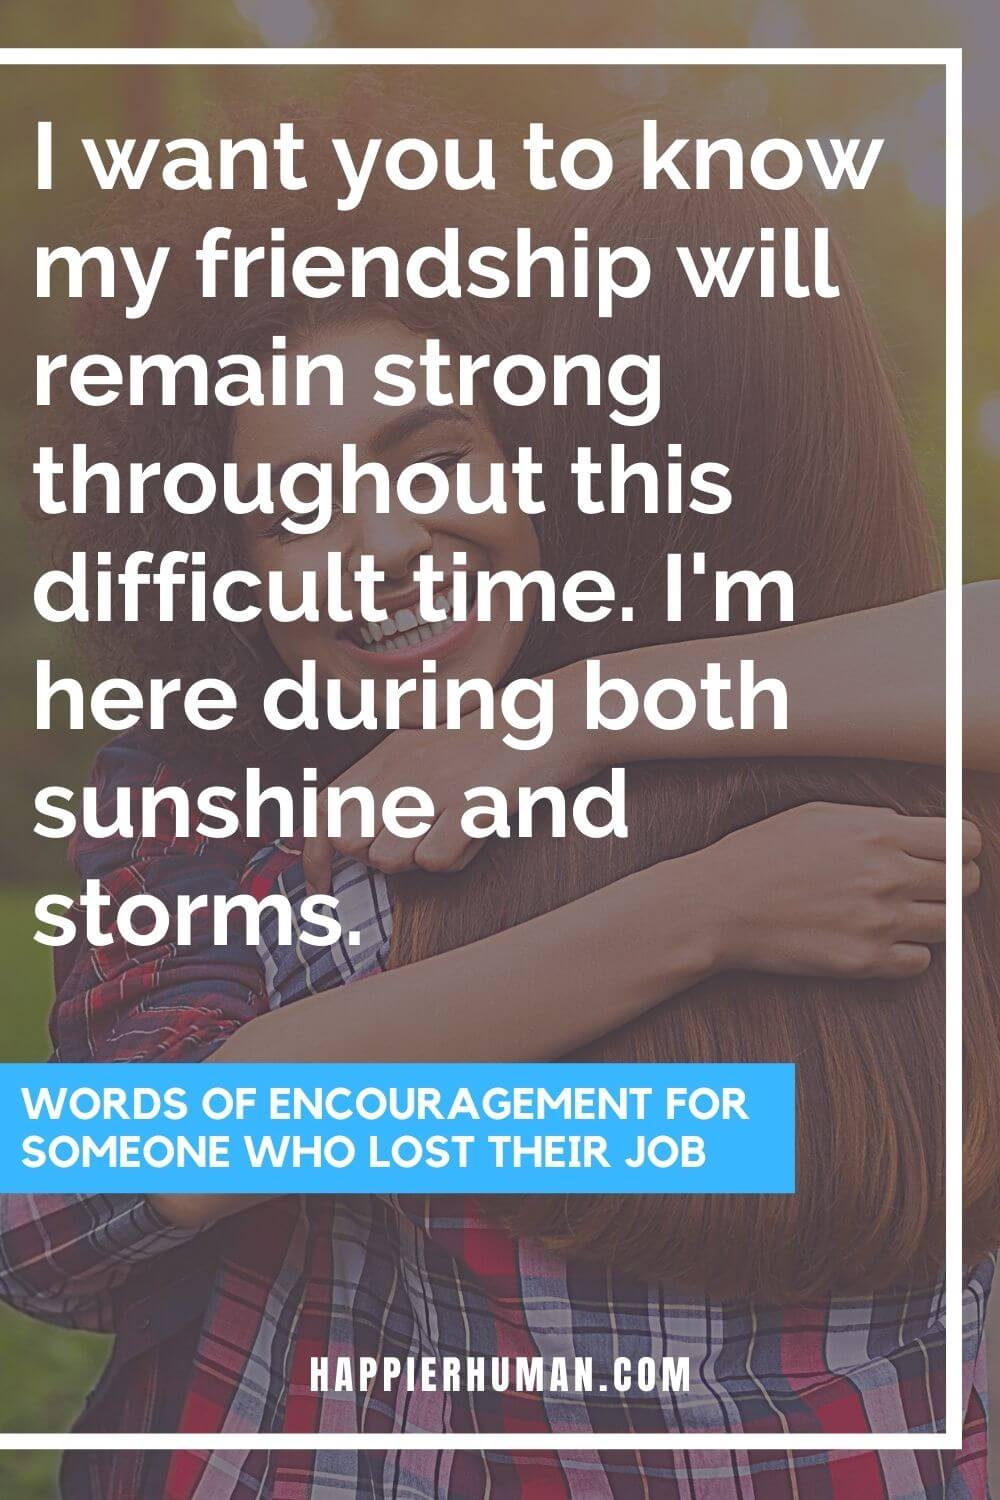 Words of Encouragement for Someone Who Lost Their Job - I want you to know my friendship will remain strong throughout this difficult time. I'm here during both sunshine and storms. | words of encouragement for someone who lost a loved one | quotes for someone who has lost their job | what to say when someone closes their business